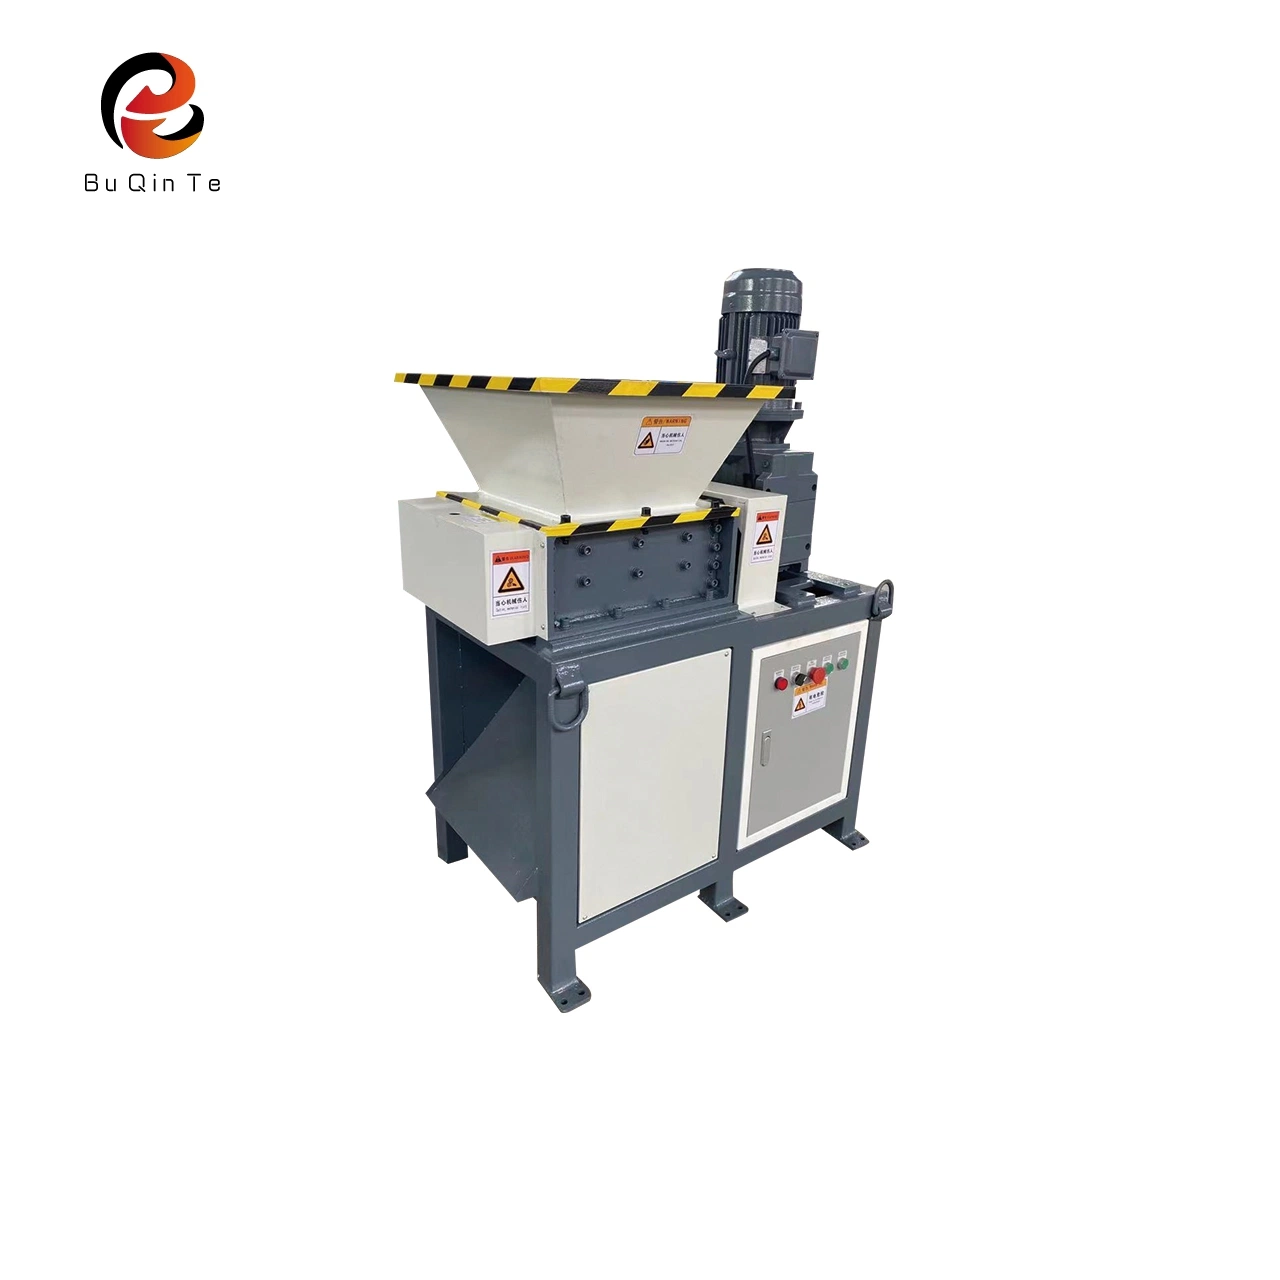 Highly Skilled Laboratory Shredders Are Popular Products